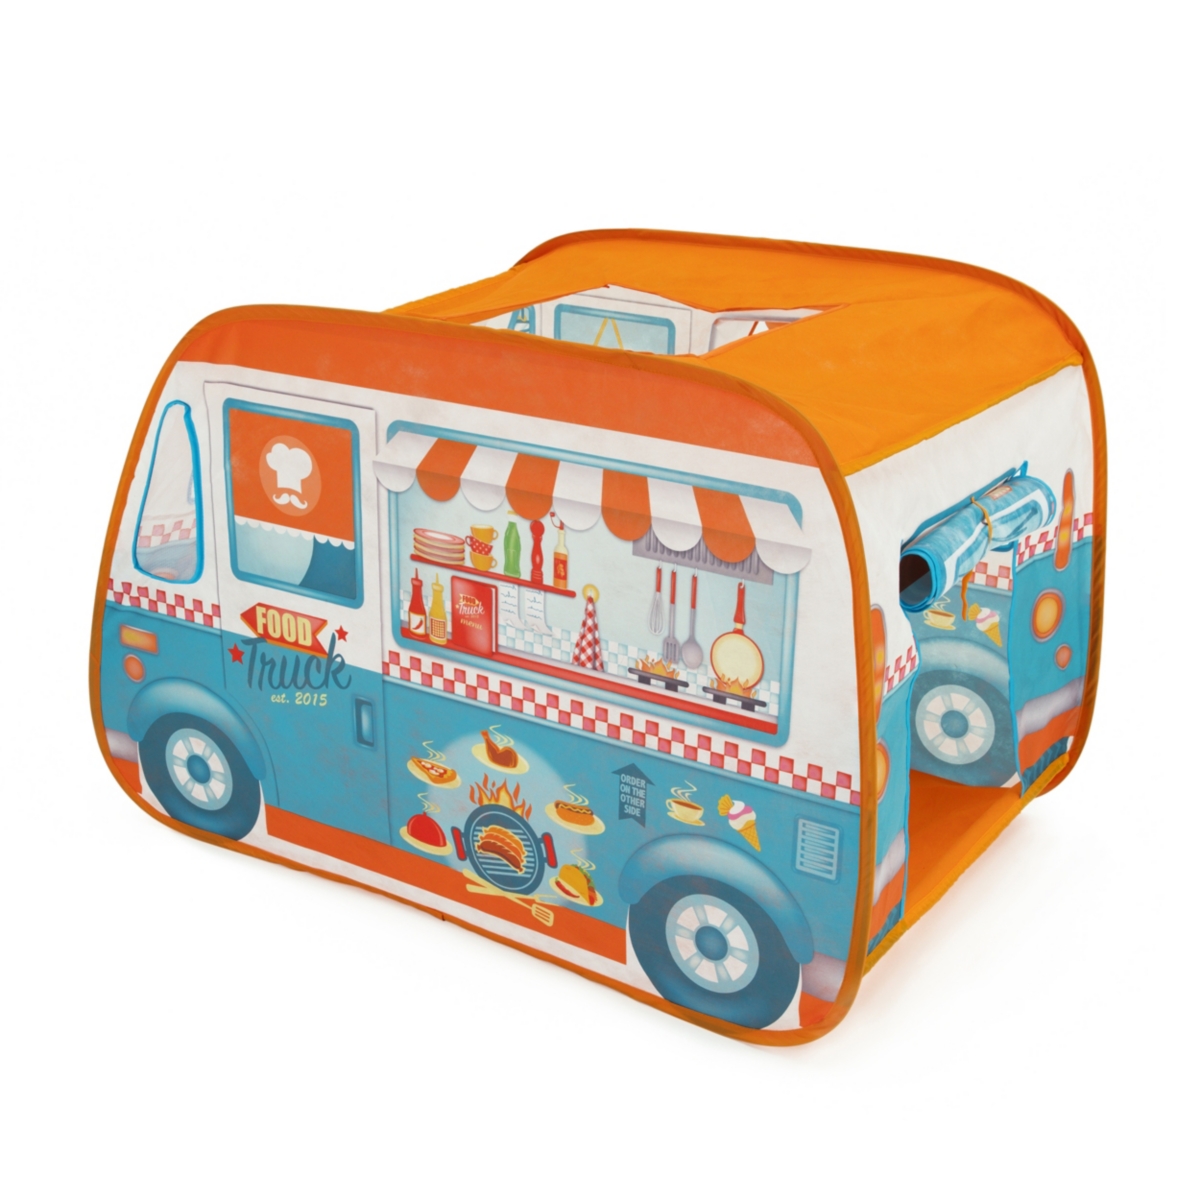 Redbox Fun2give Pop It Up Play Tent Foodtruck In Multi